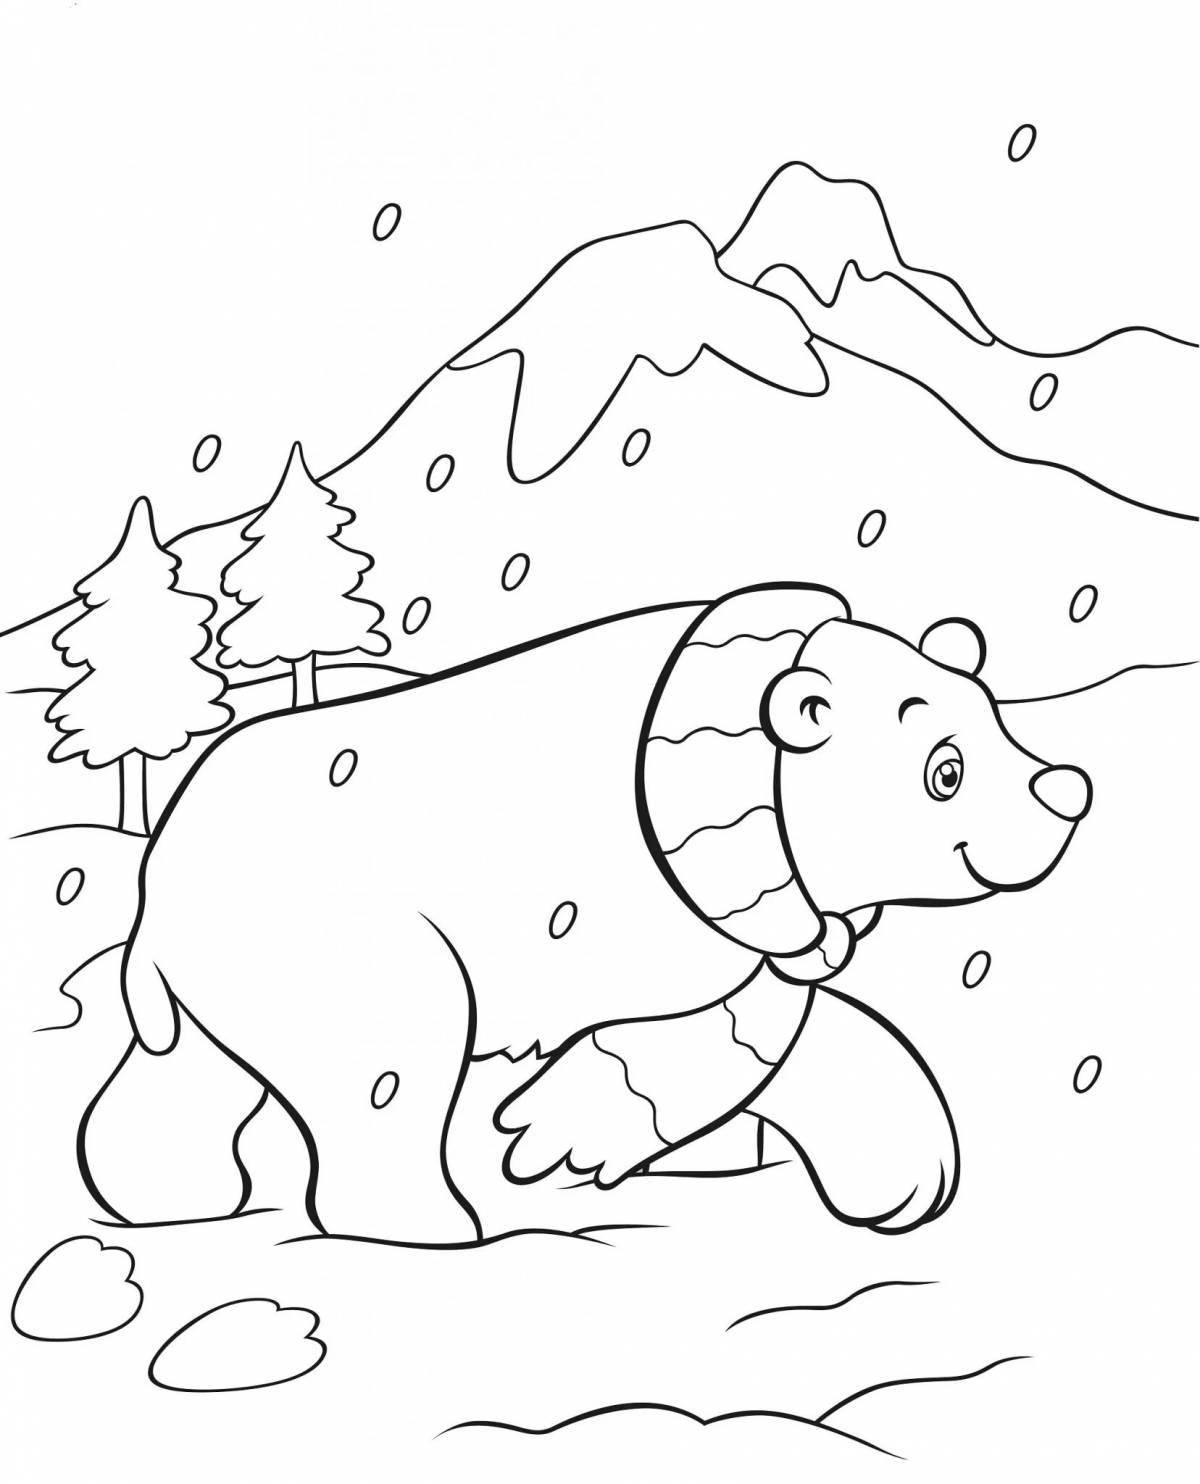 Fun northern coloring book for kids